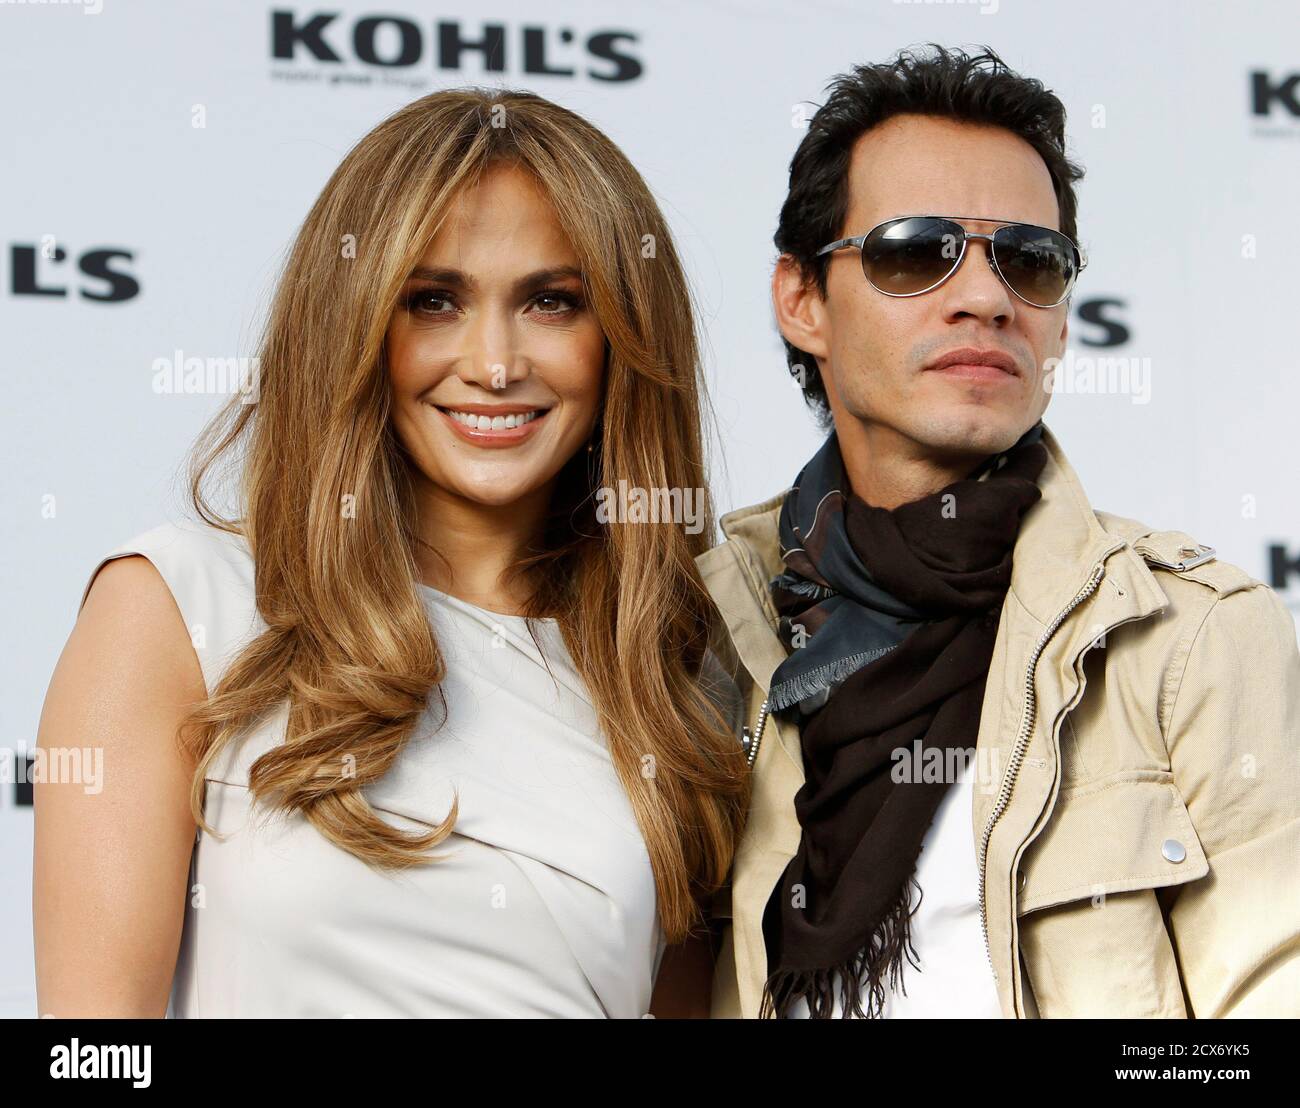 Jennifer Lopez (L) and her husband Marc Anthony pose at a news conference to announce 'The Jennifer Lopez and Marc Anthony' collections in partnership with Kohl's department stores at The London West Hollywood hotel in West Hollywood, California, November 18, 2010. Kohl's will be the exclusive provider of the contemporary lifestyle brands in the U.S. and it will be available nationwide in Fall 2011 beginning with women's and men's apparel and accessories. REUTERS/Danny Moloshok (UNITED STATES - Tags: ENTERTAINMENT FASHION BUSINESS) Stock Photo